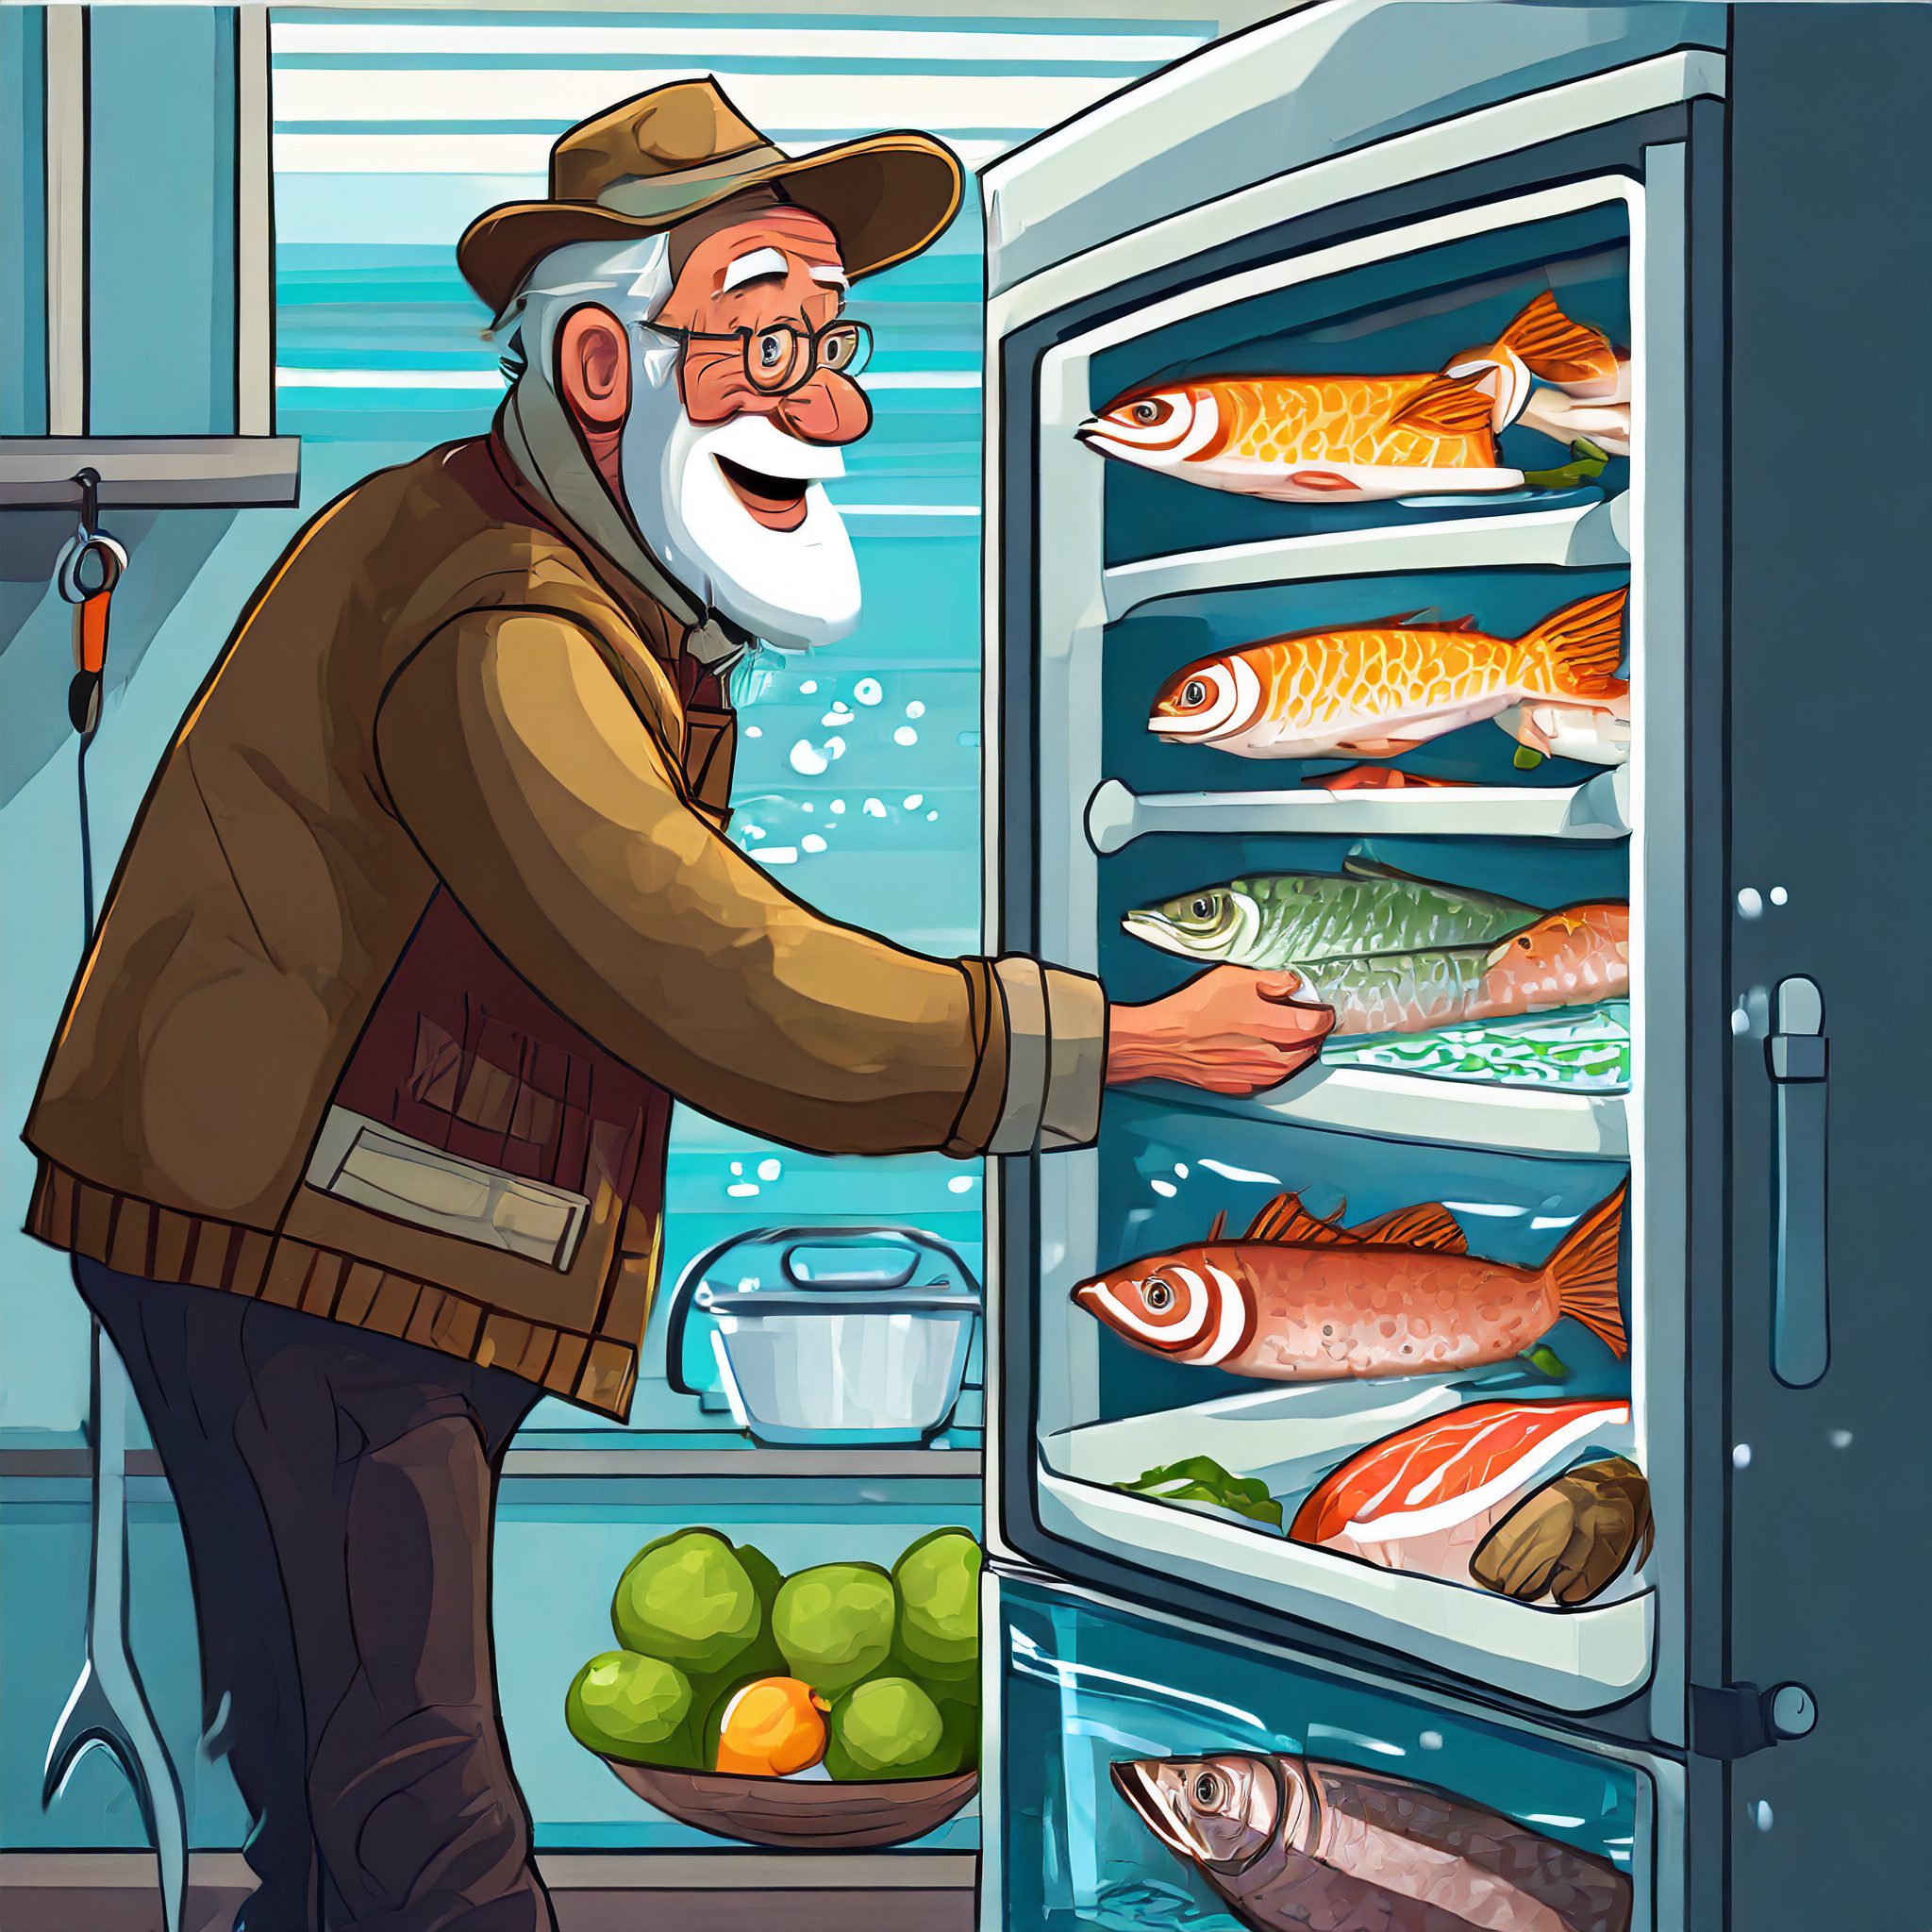 https://firstbuild.com/wp-content/uploads/2022/08/Firefly-a-older-fisherman-places-fresh-fish-into-a-refrigerator-74857.jpg